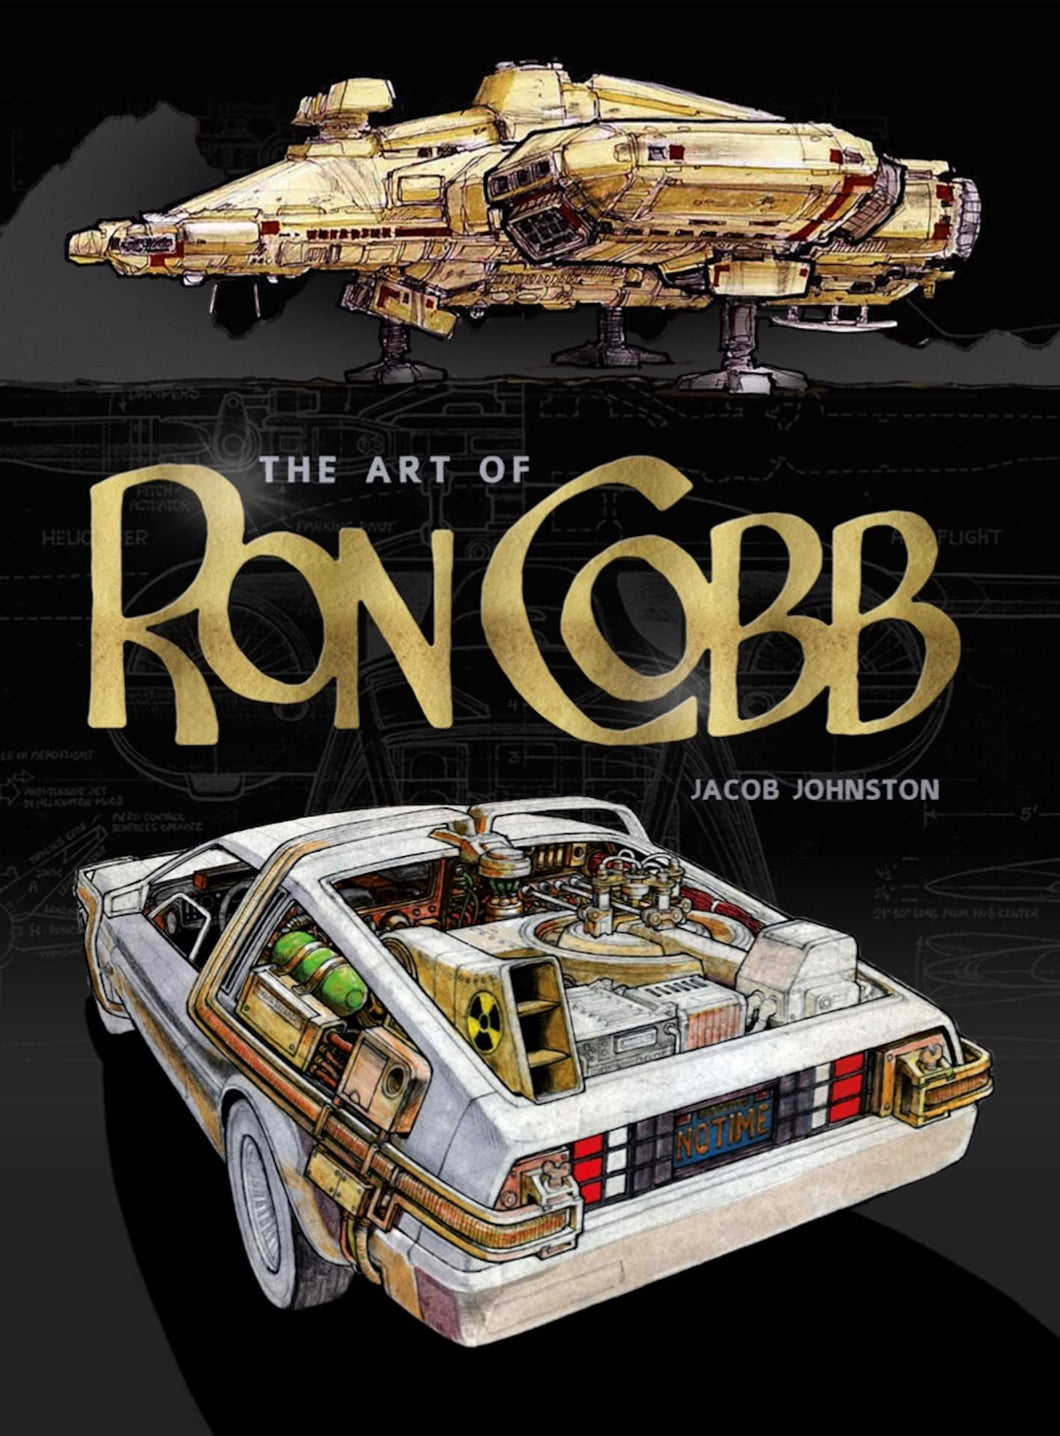 The Art of Ron Cobb (Hardcover)